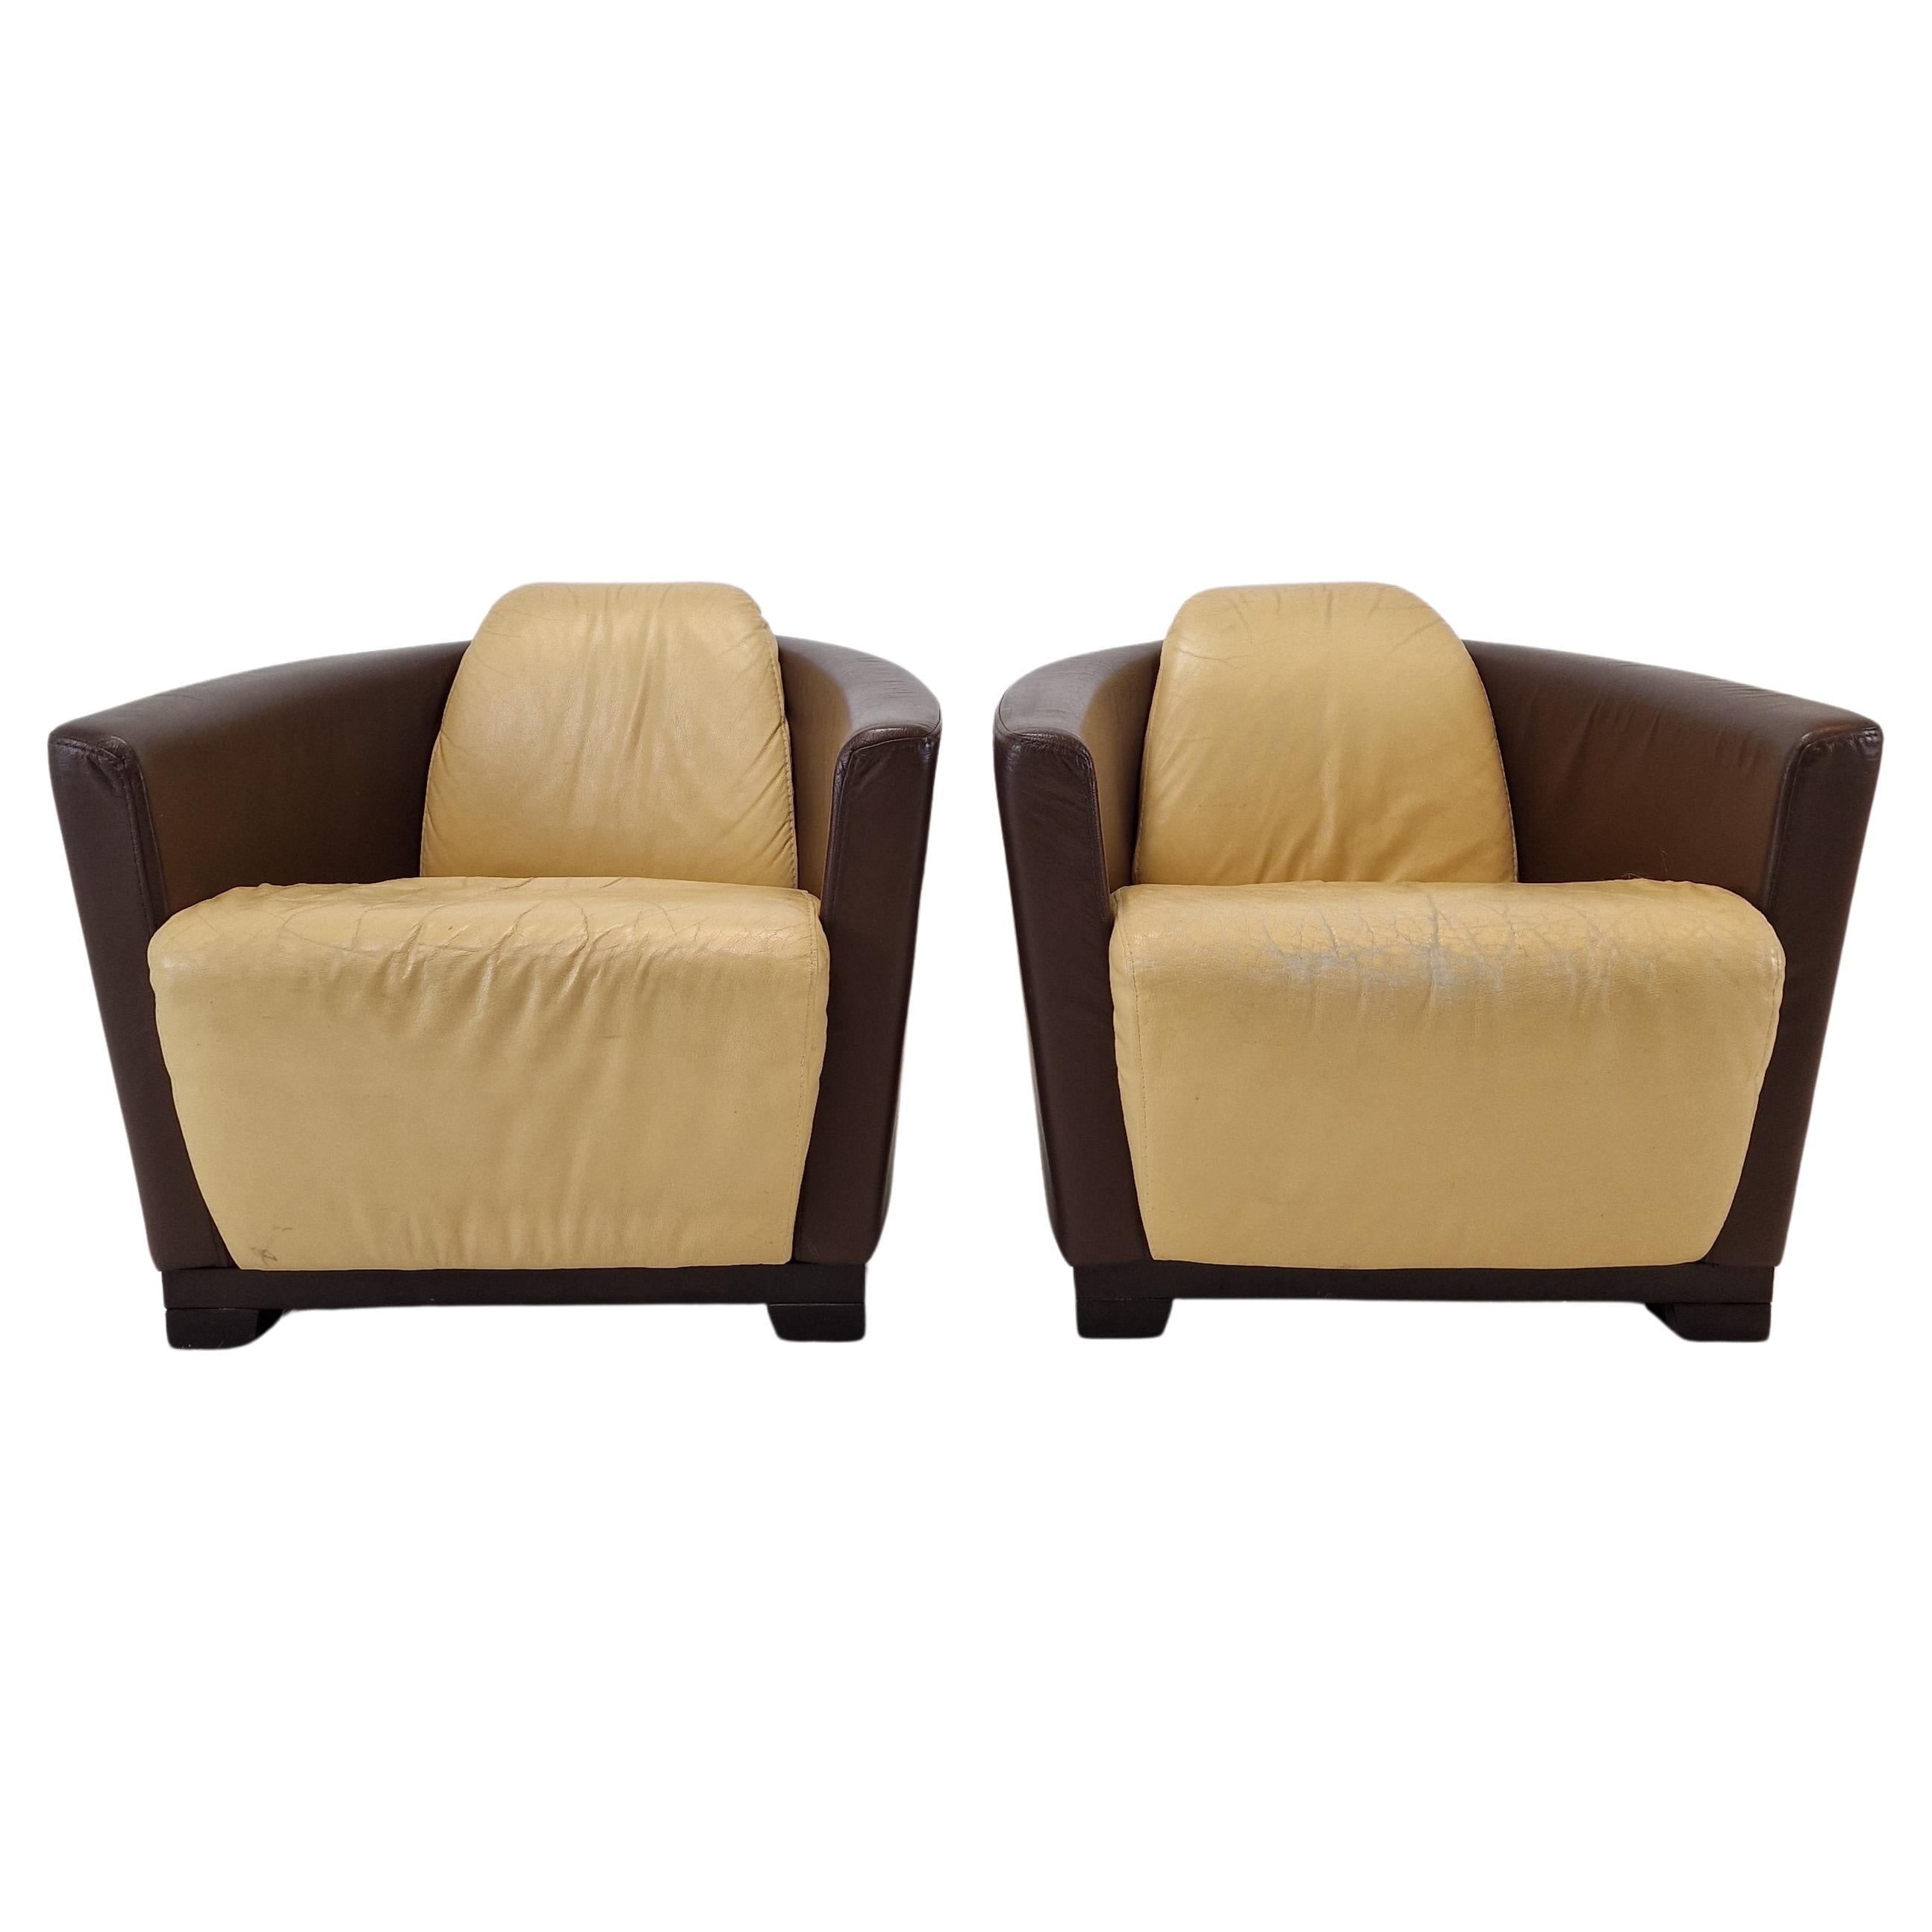 Mid Century Set of 2 Calia Club or Lounge Chairs, Italy 1980's